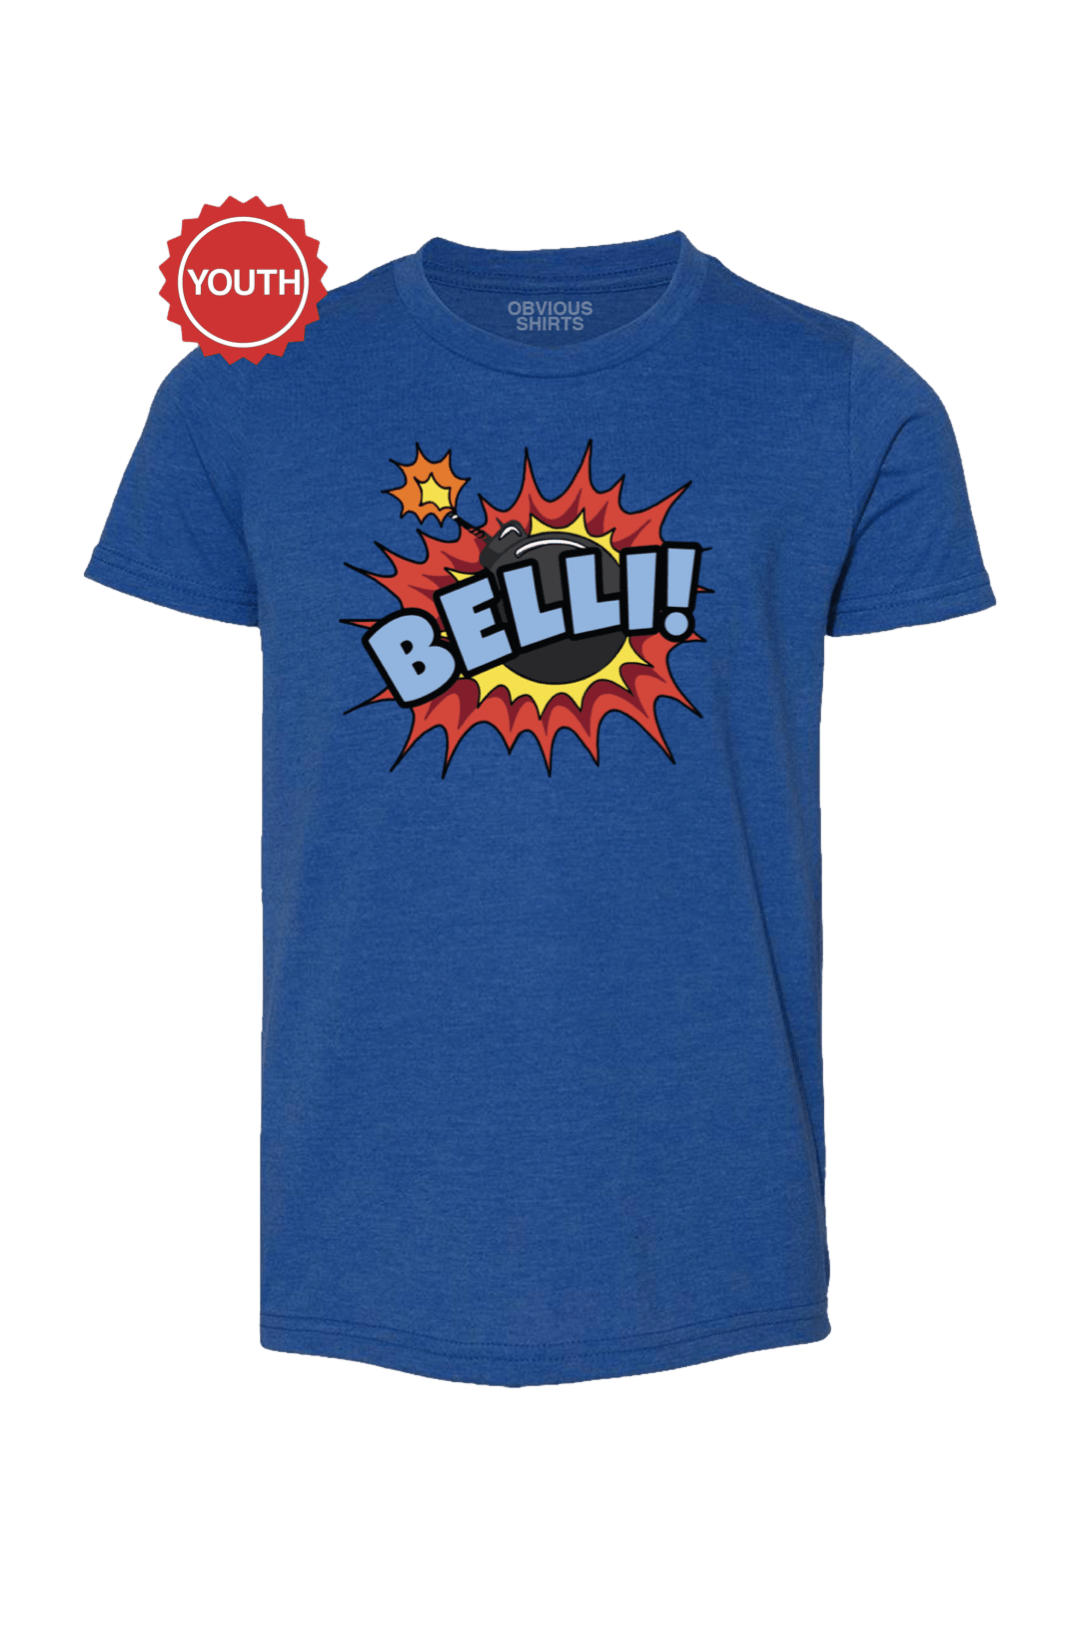 BELLI BOMB! (YOUTH) - OBVIOUS SHIRTS